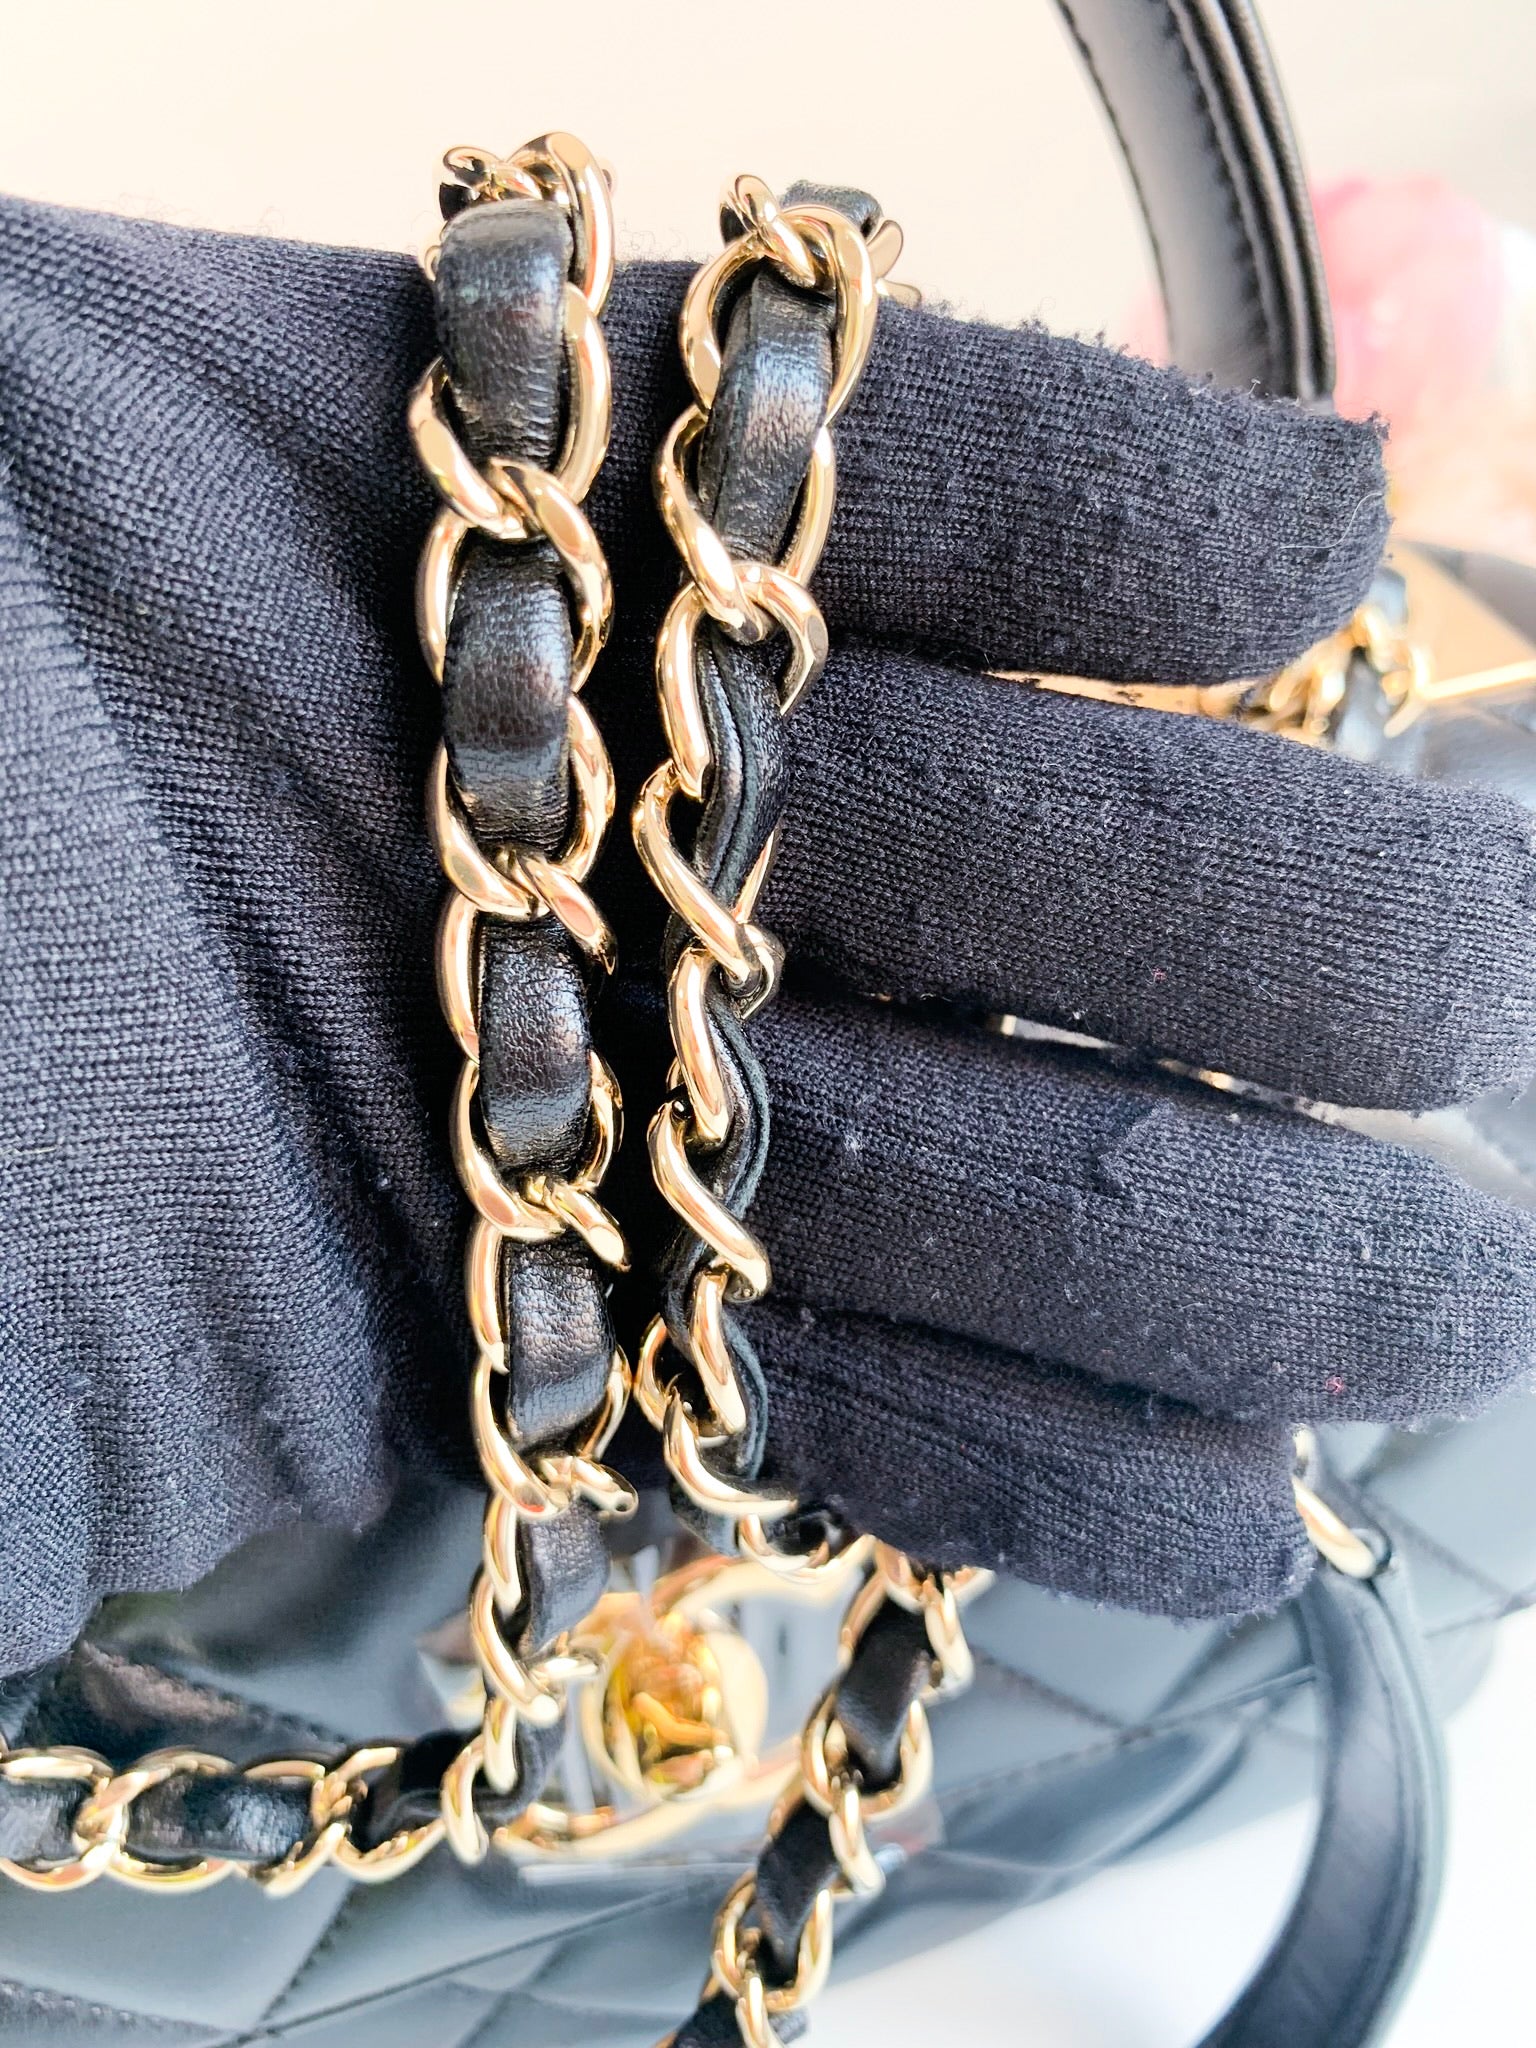 chanel purse with chain